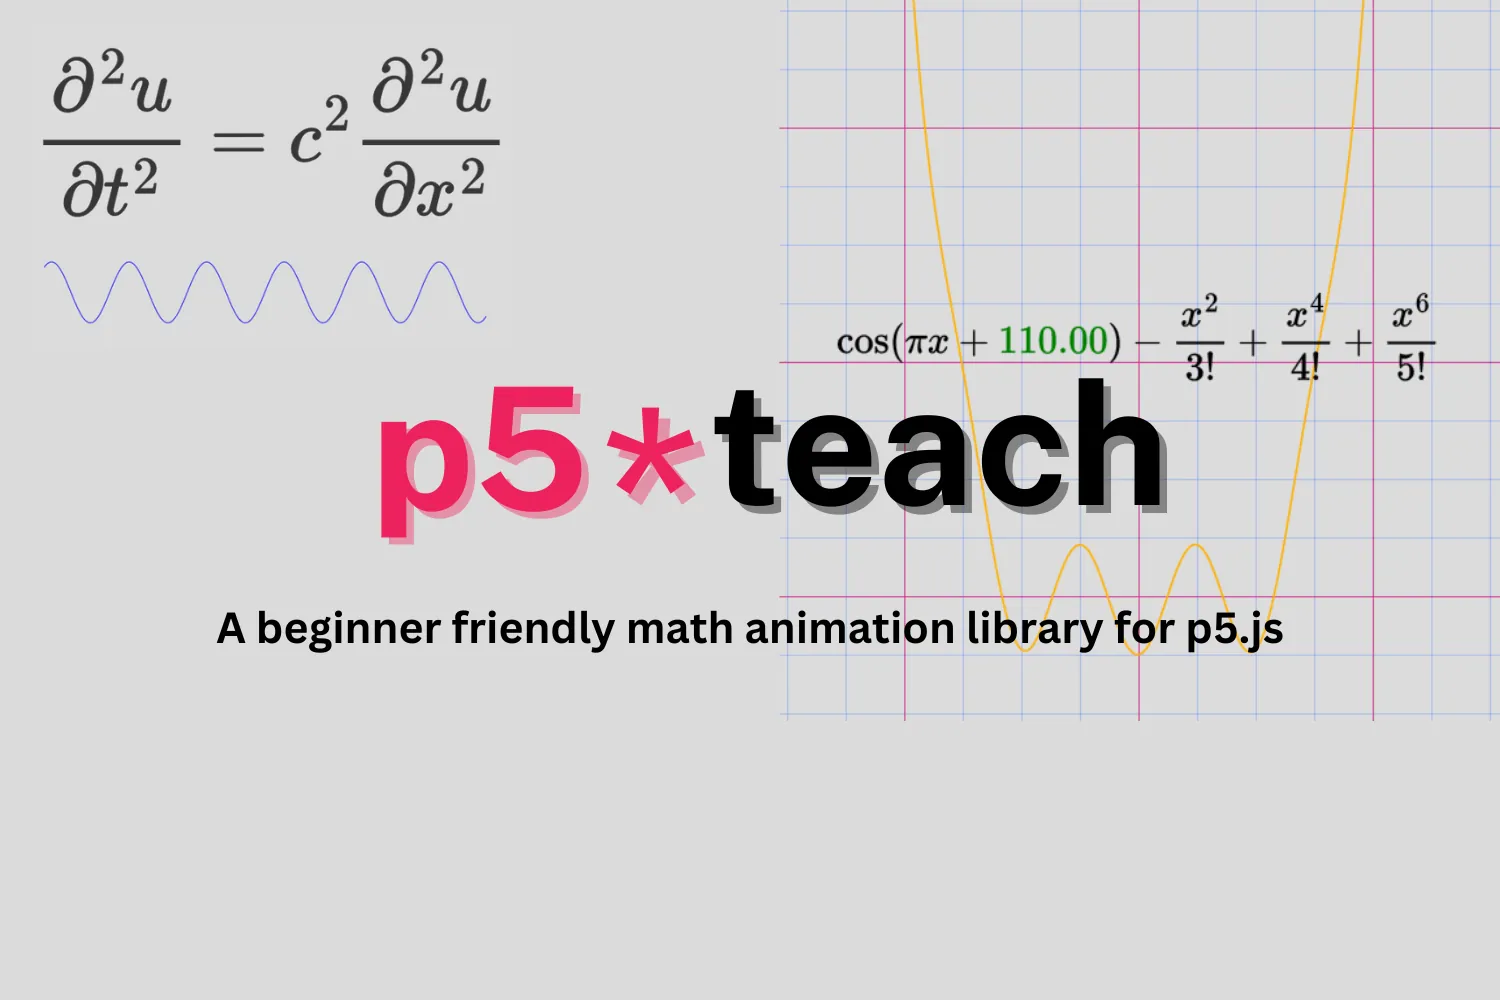 Wave equation on the upper left corner and right upper corner has a graph of cosine function plus some polynomial terms. A logo and description of 'p5.teach.js' library are placed in the center.